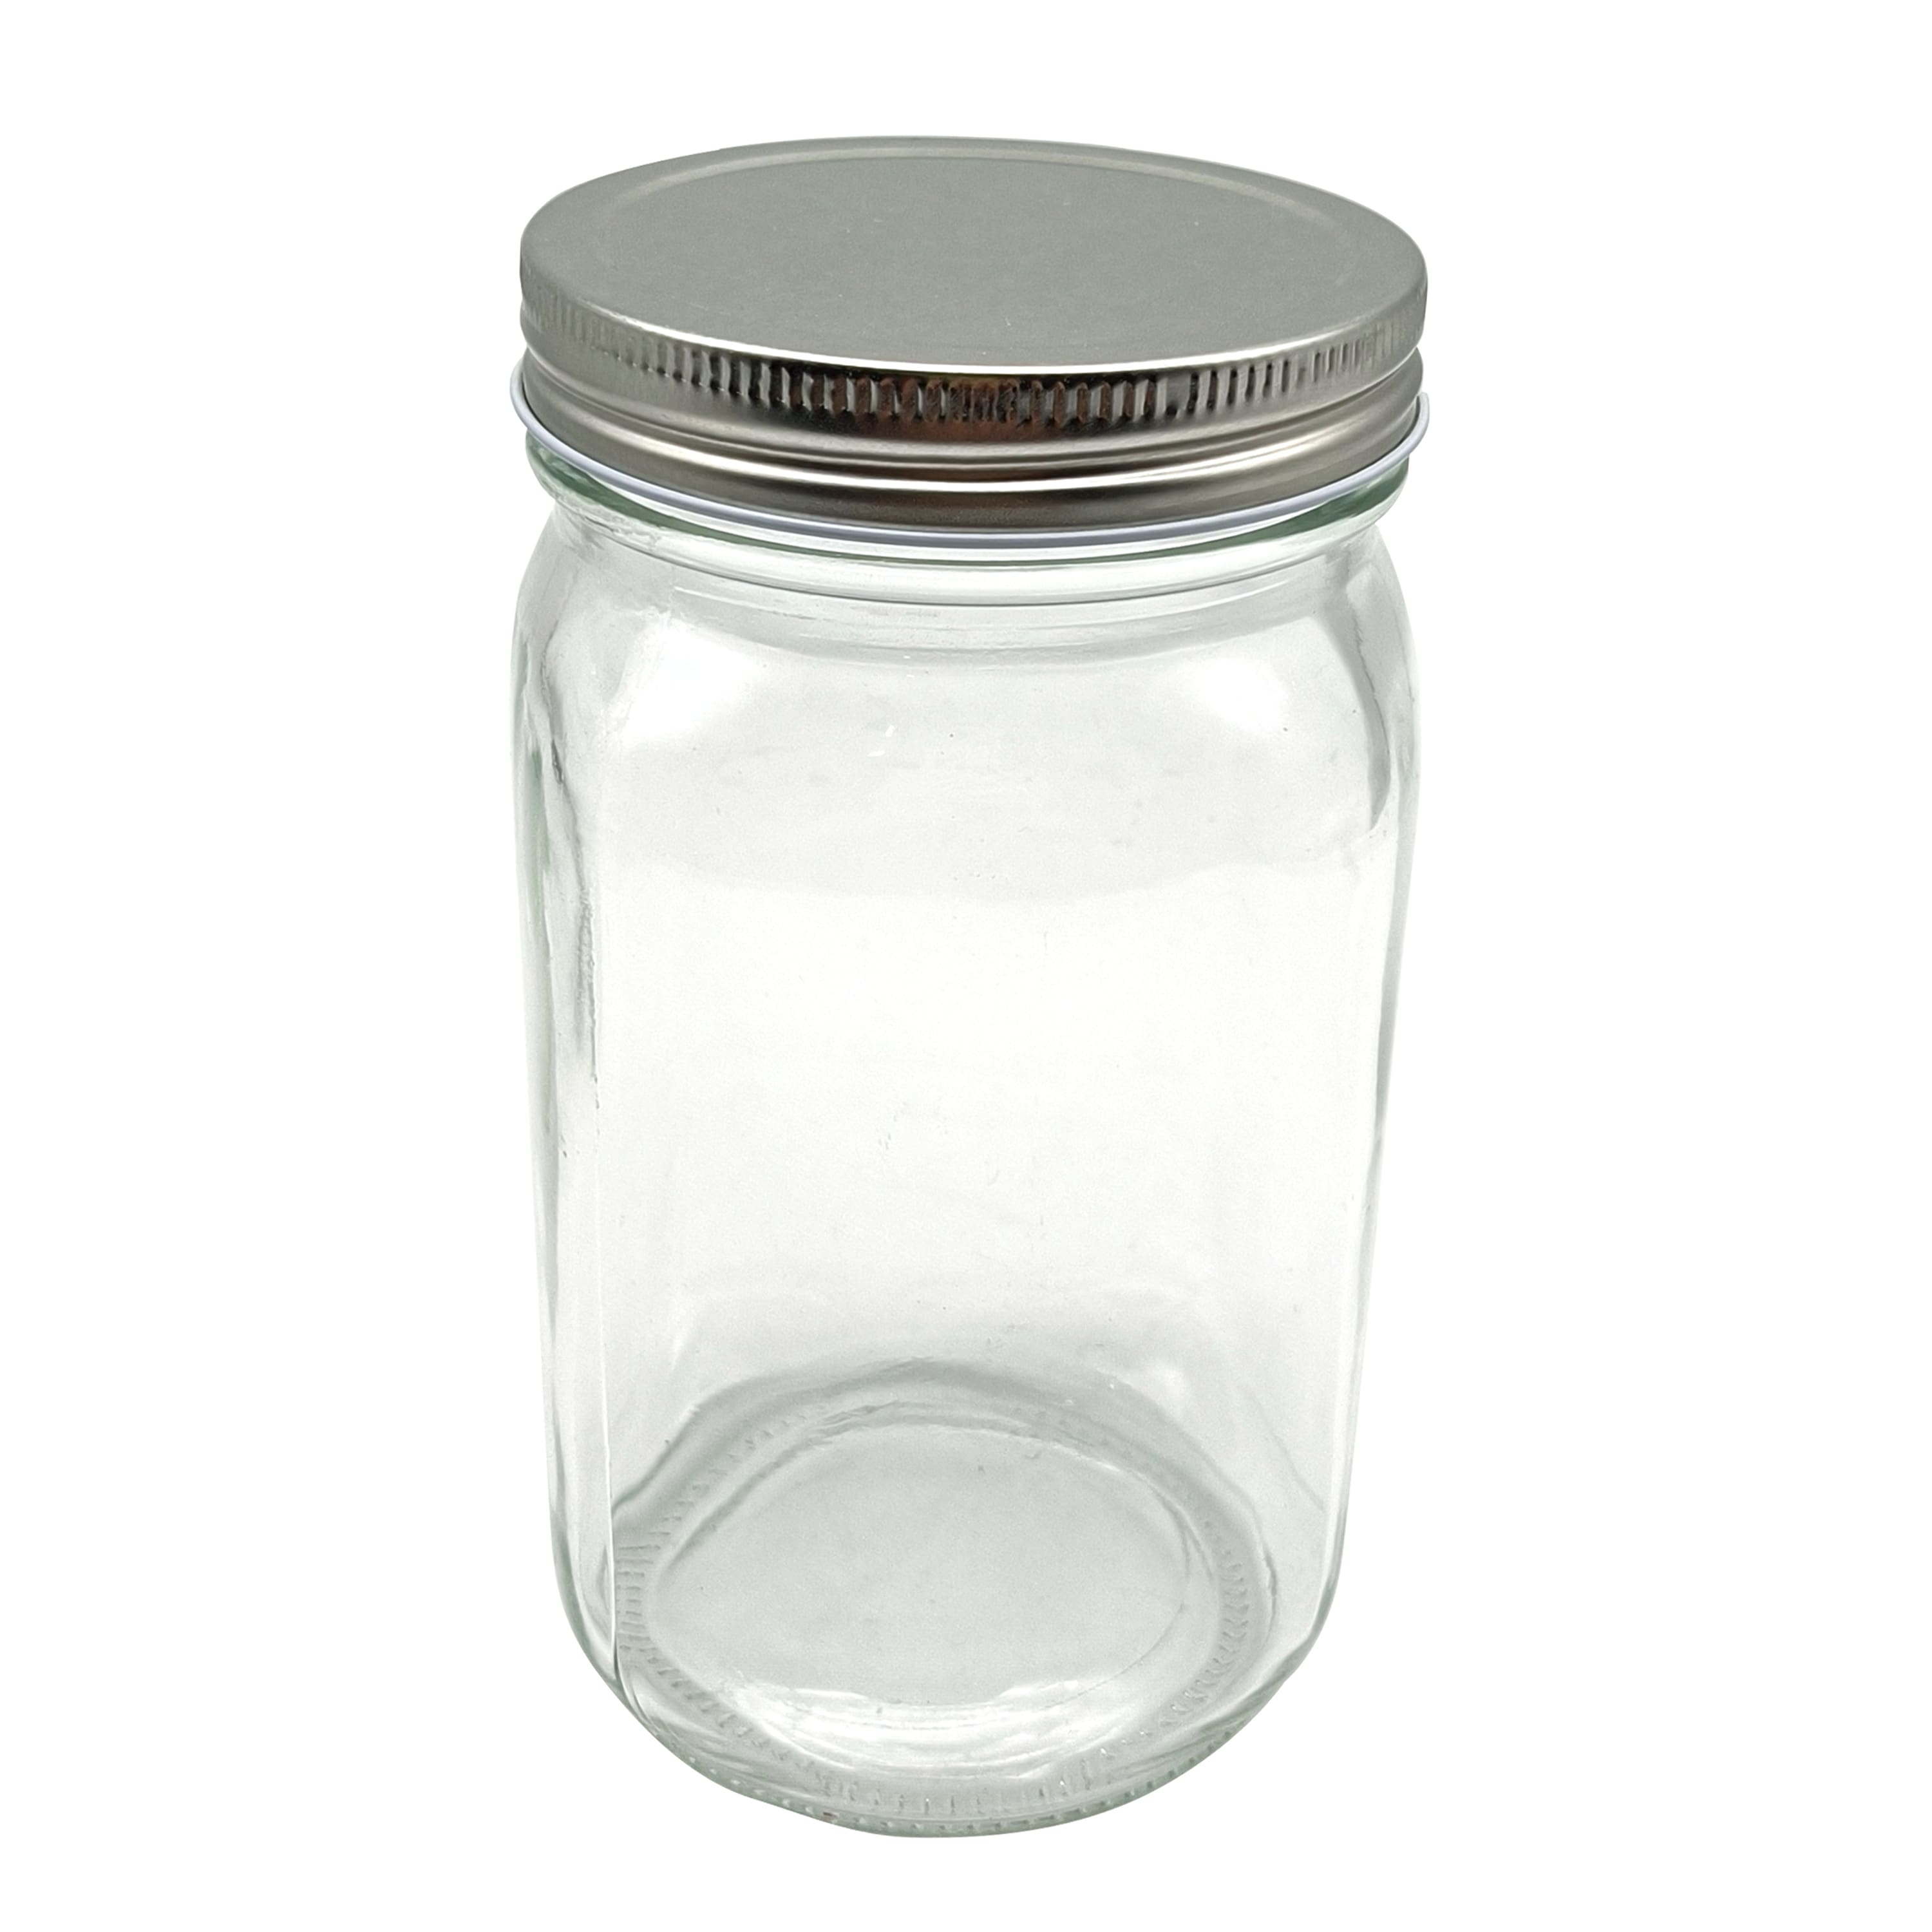 12 Pack: Quart Wide Mouth Glass Jar by Ashland®